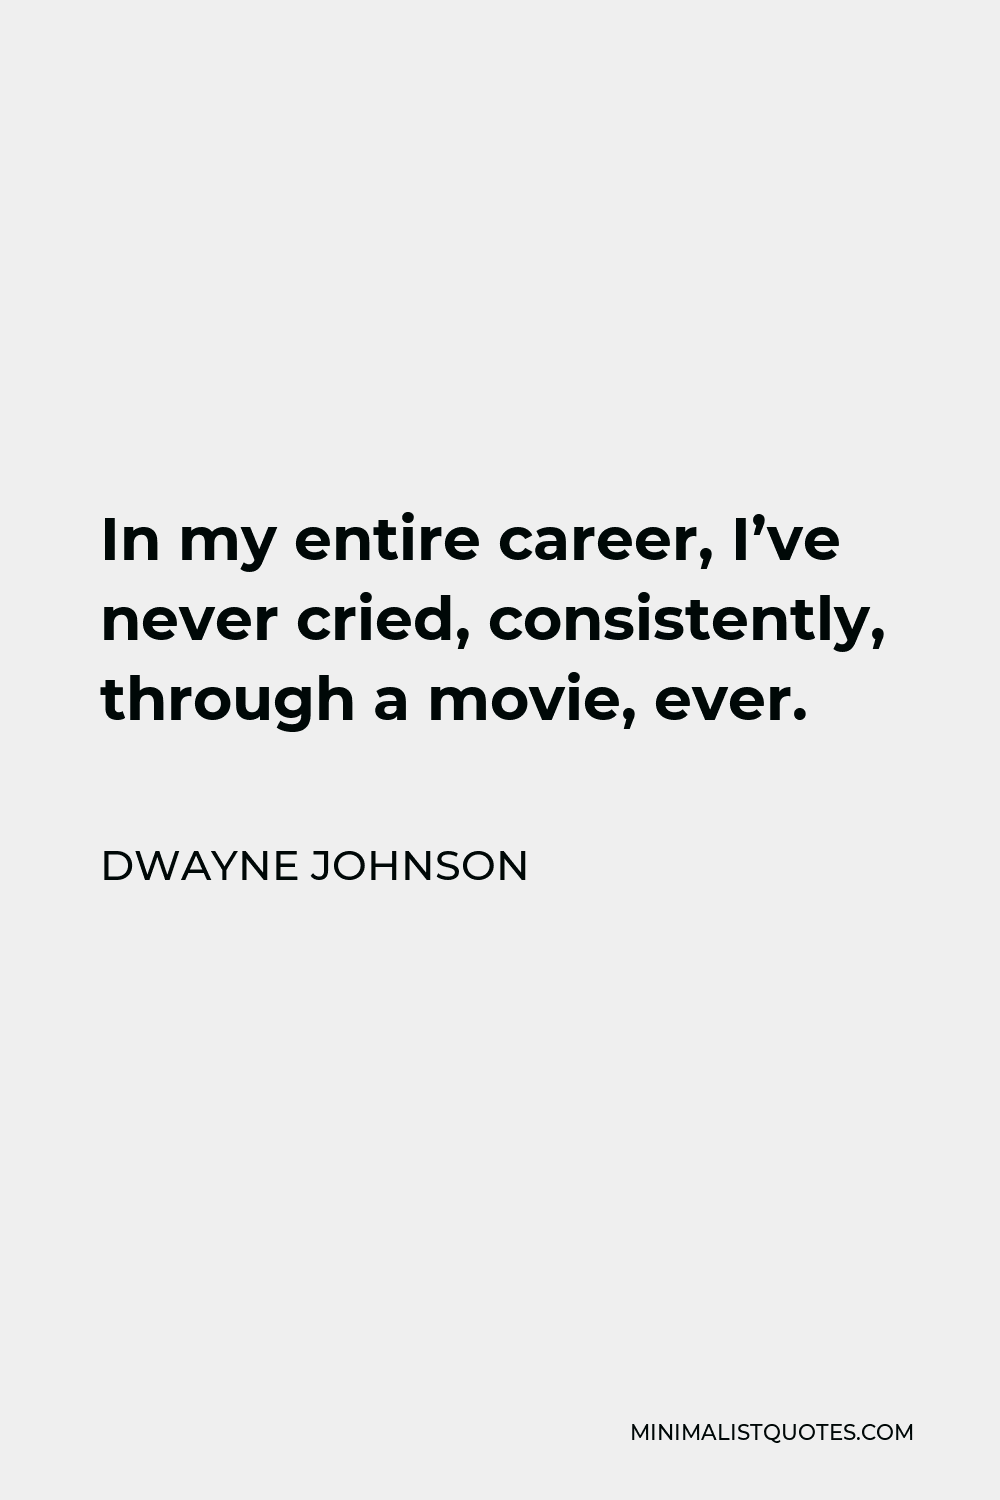 Dwayne Johnson Quote - In my entire career, I’ve never cried, consistently, through a movie, ever.